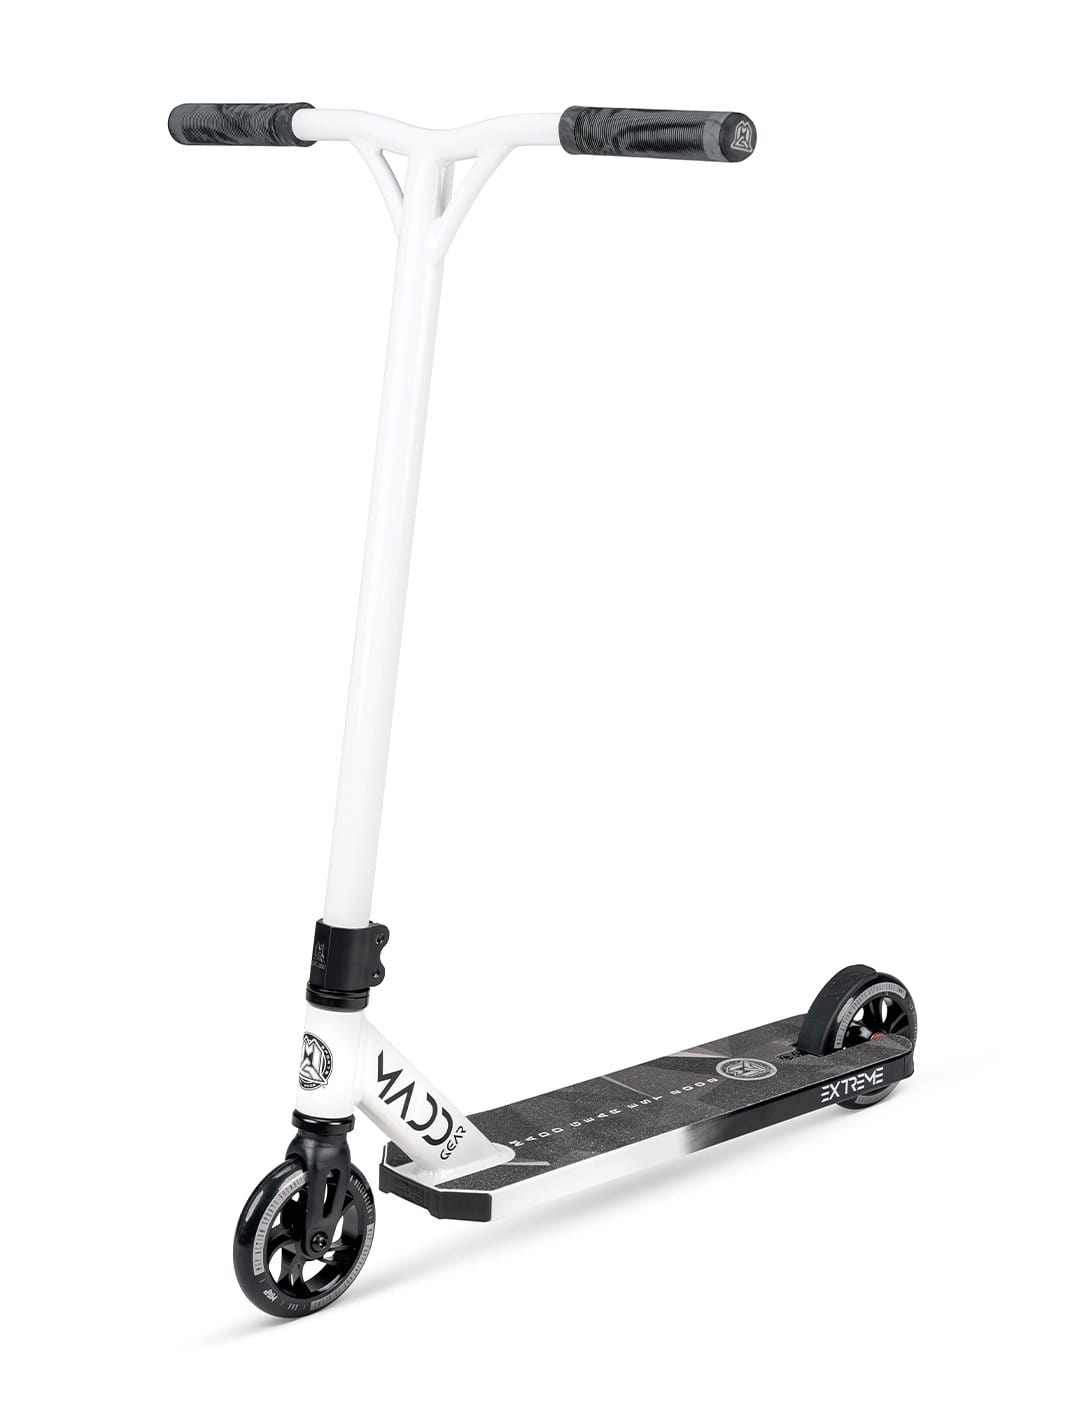 MGP Madd Gear Renegade Extreme Stunt Pro Scooter Lightweight White Black